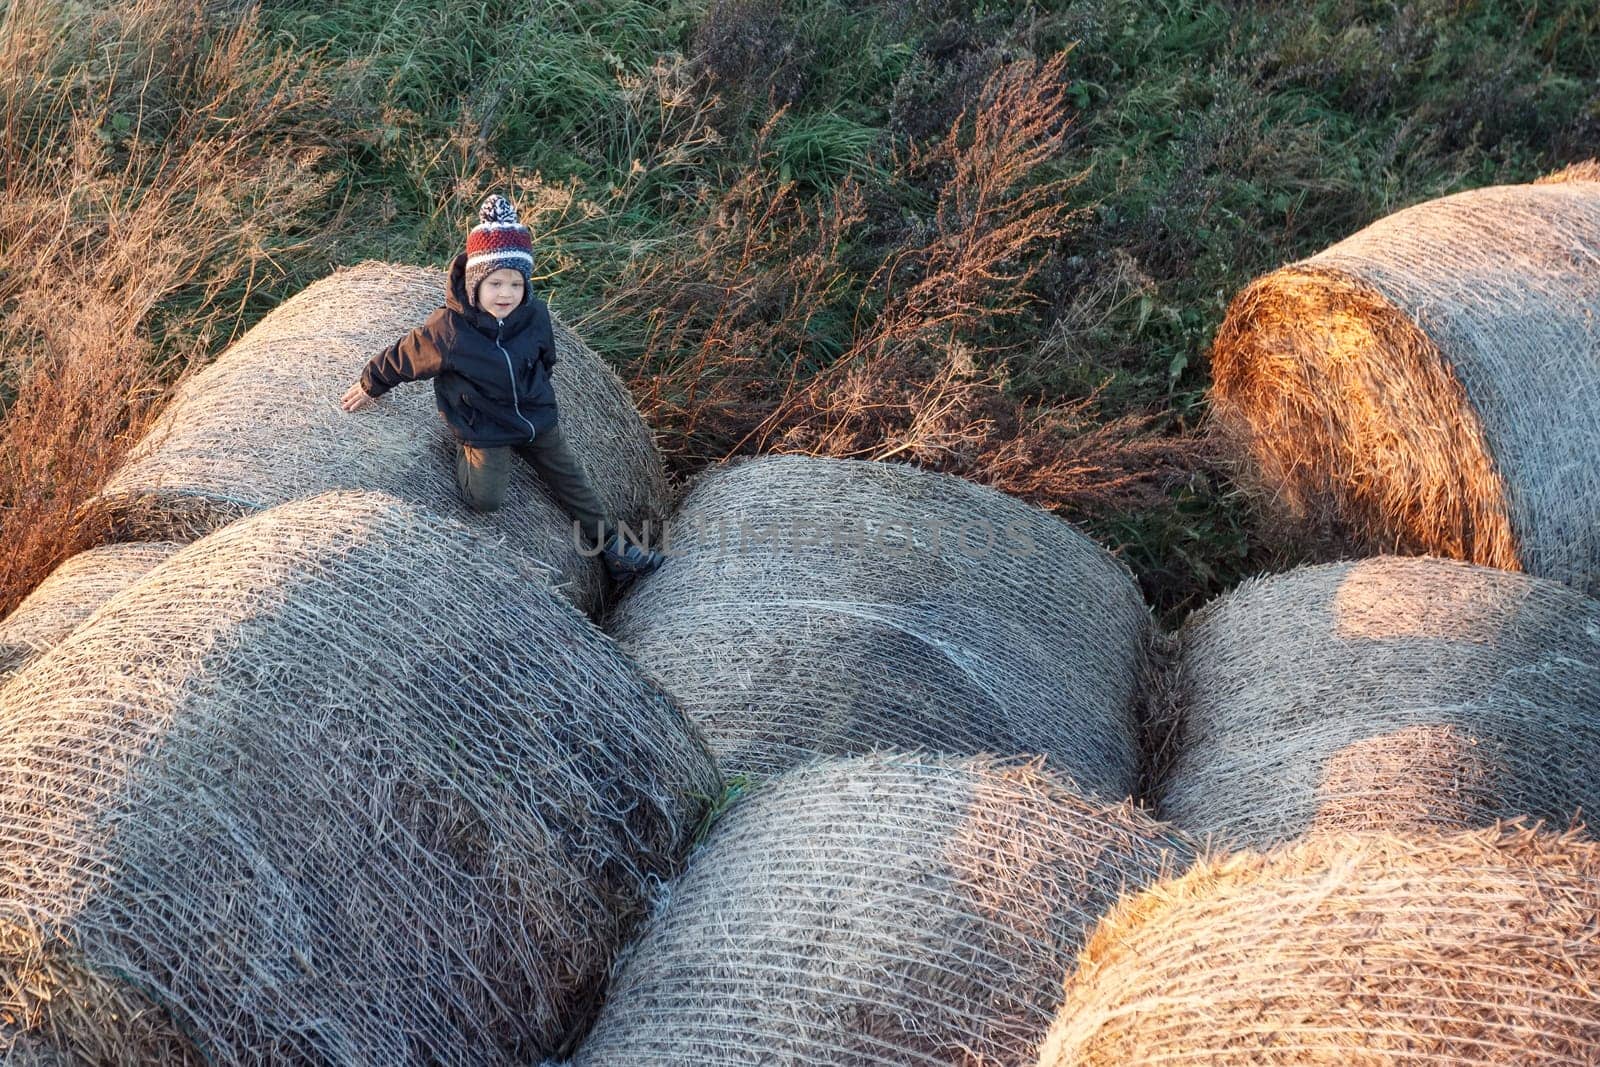 A little cute boy with a warm autumn hat among large rolls of straw in the evening sunlight, photo taken from above.